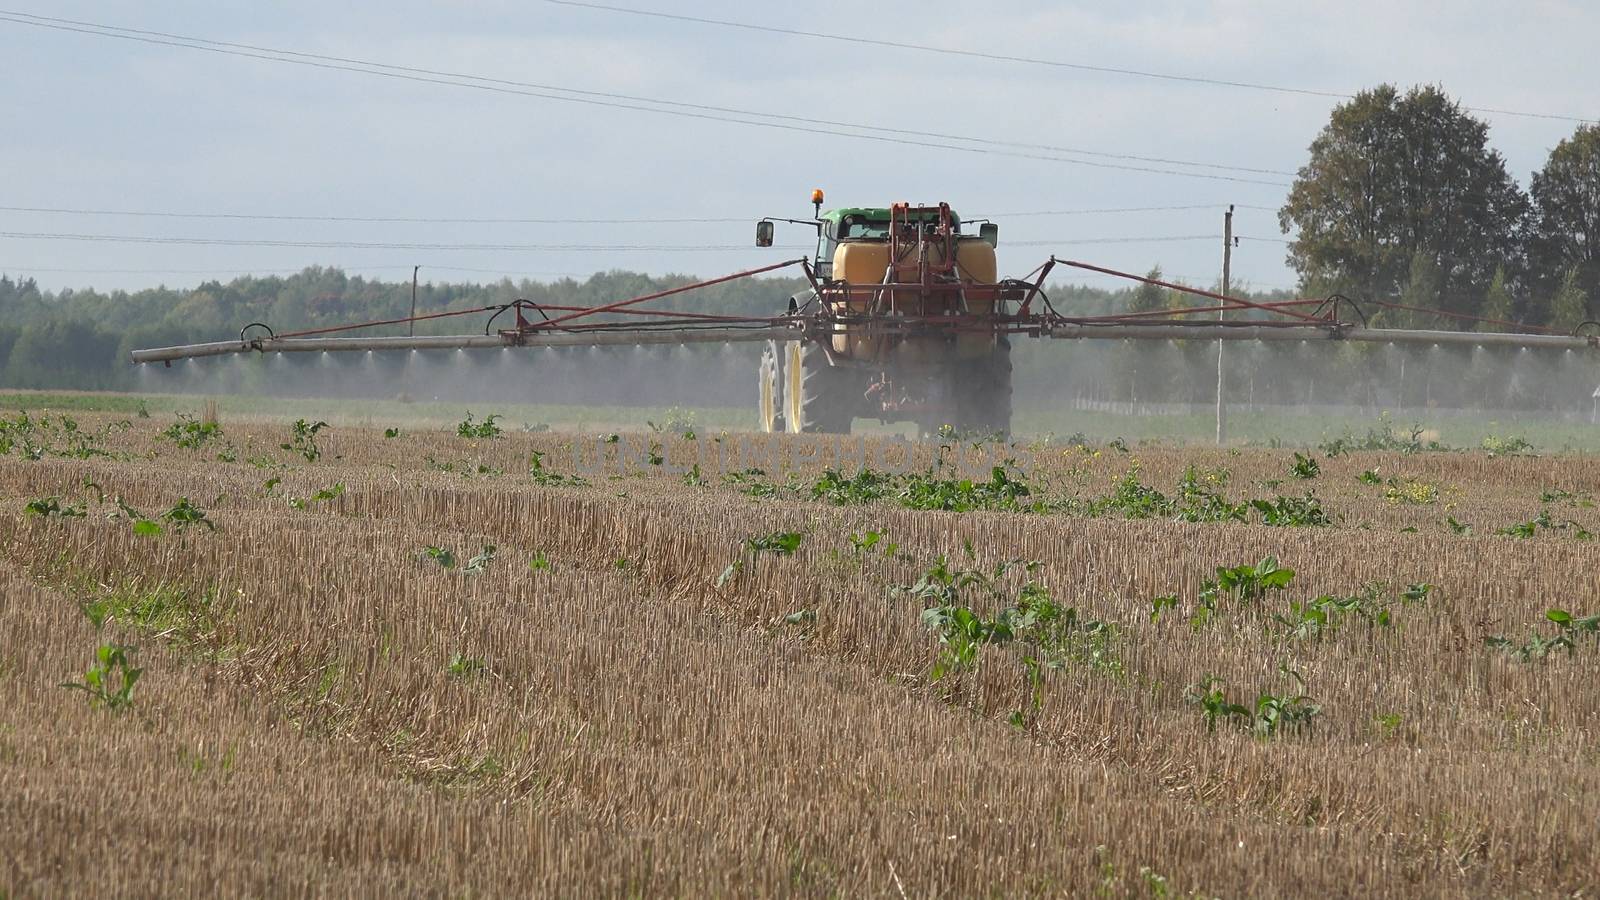 Tractor spray stubble field with herbicide chemicals in autumn. Farmer killing weeds in agriculture field before winter.